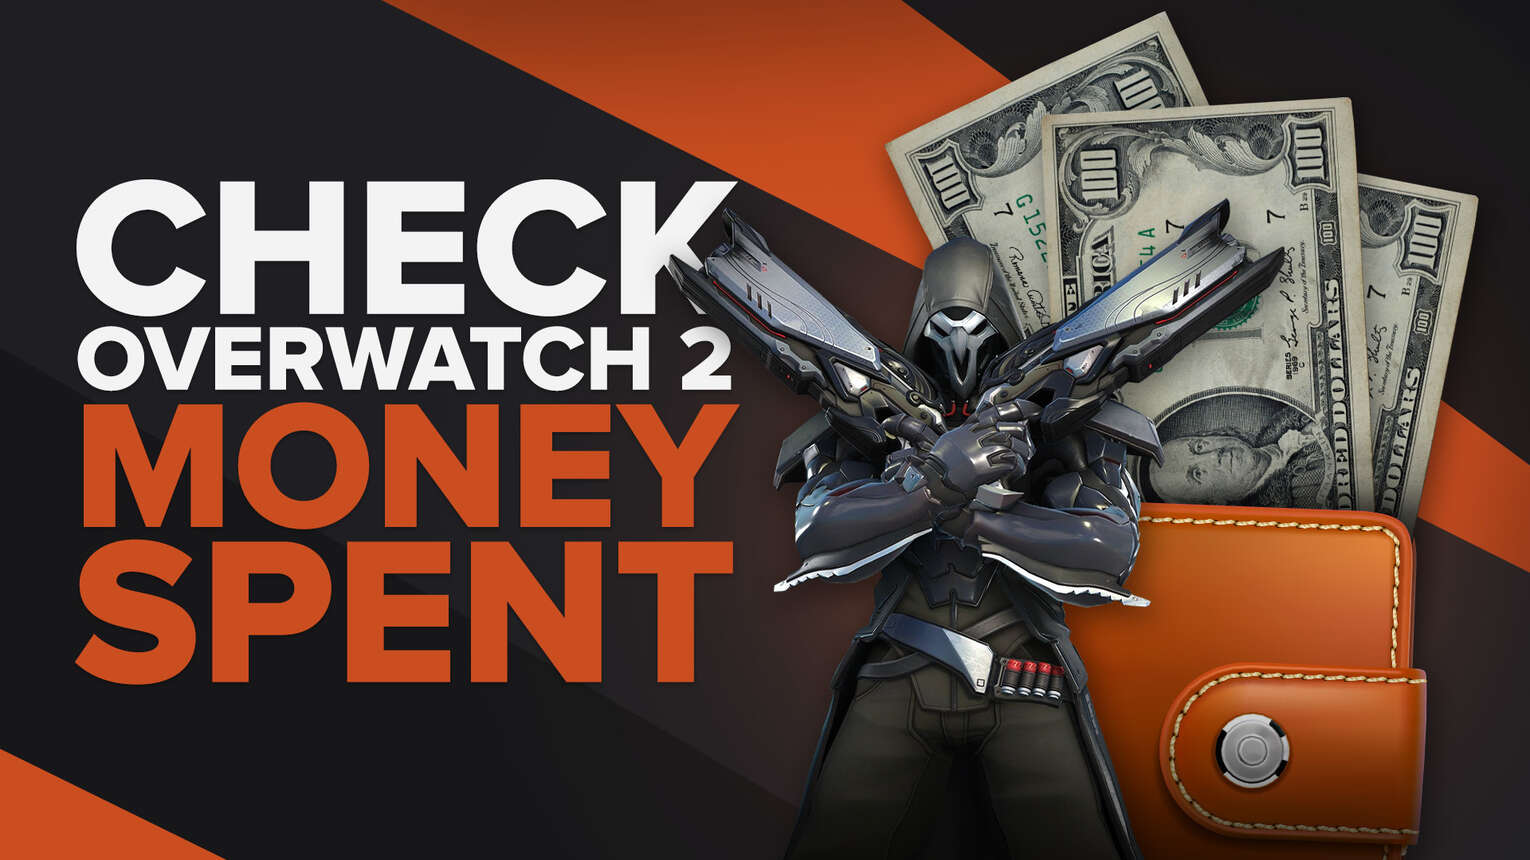 How to check money spent on Overwatch 2